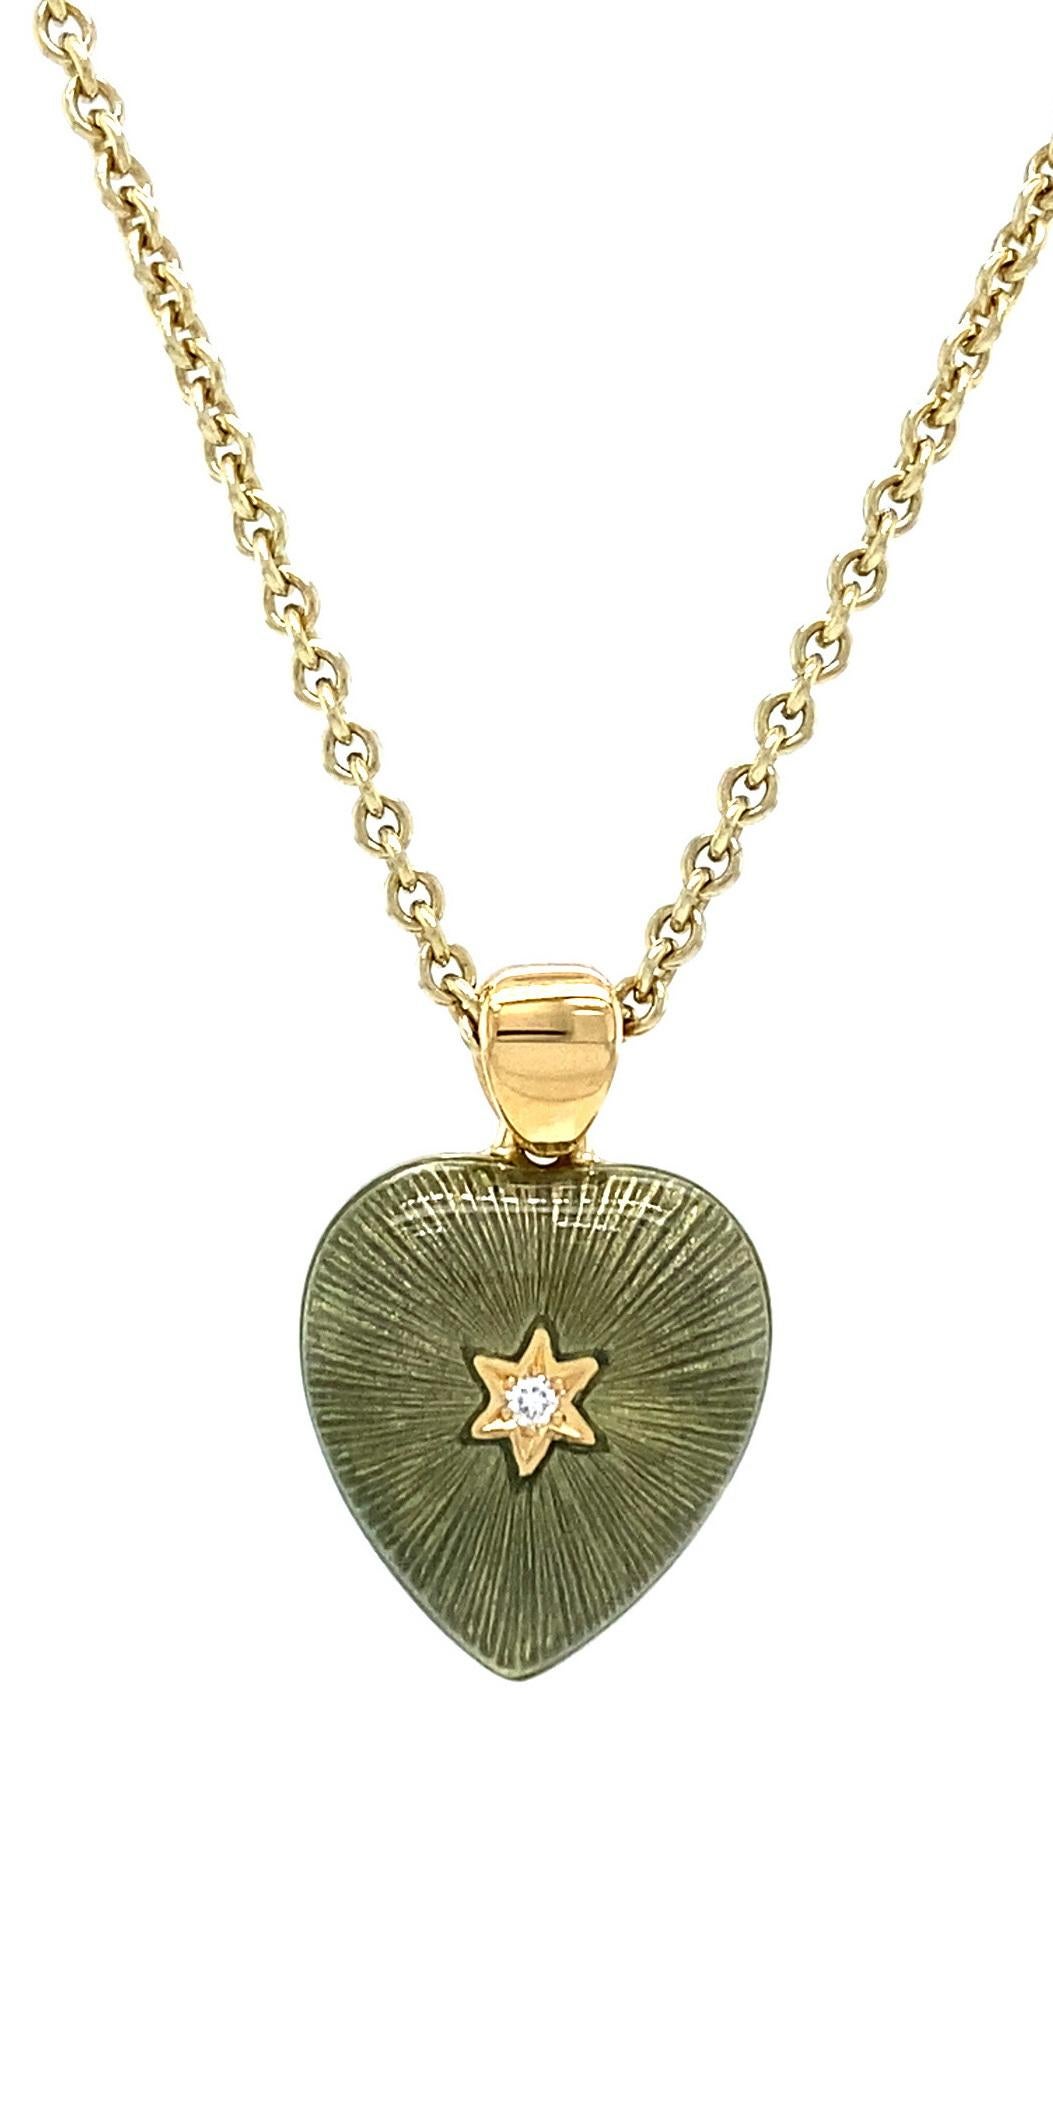 Victor Mayer heart shaped two colored pendant necklace 18k yellow gold, olive green and yellow vitreous enamel, 2 diamonds, total 2.02 ct, G VS, measurements app. 11.8 mm x 13.0 mm

About the creator Victor Mayer
Victor Mayer is internationally